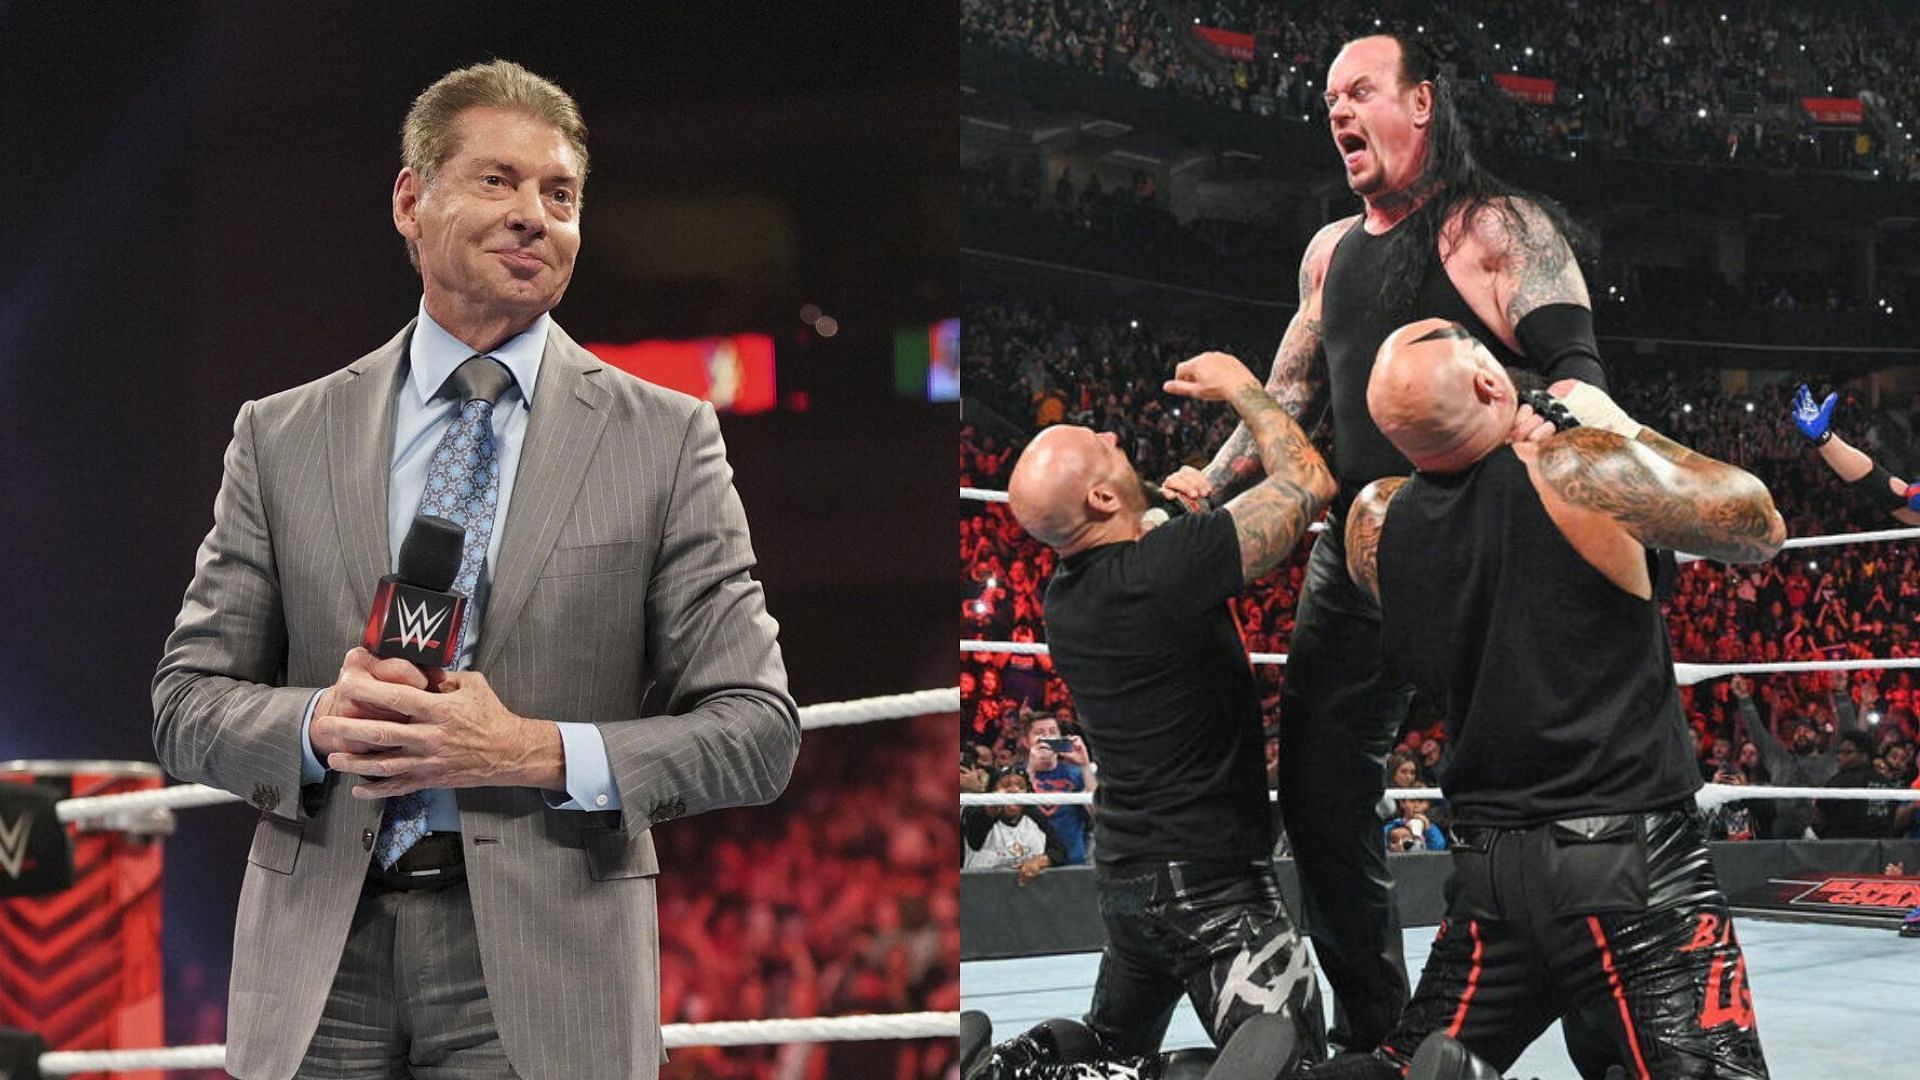 Vince McMahon worked with The Undertaker for decades [Photos courtesy of WWE